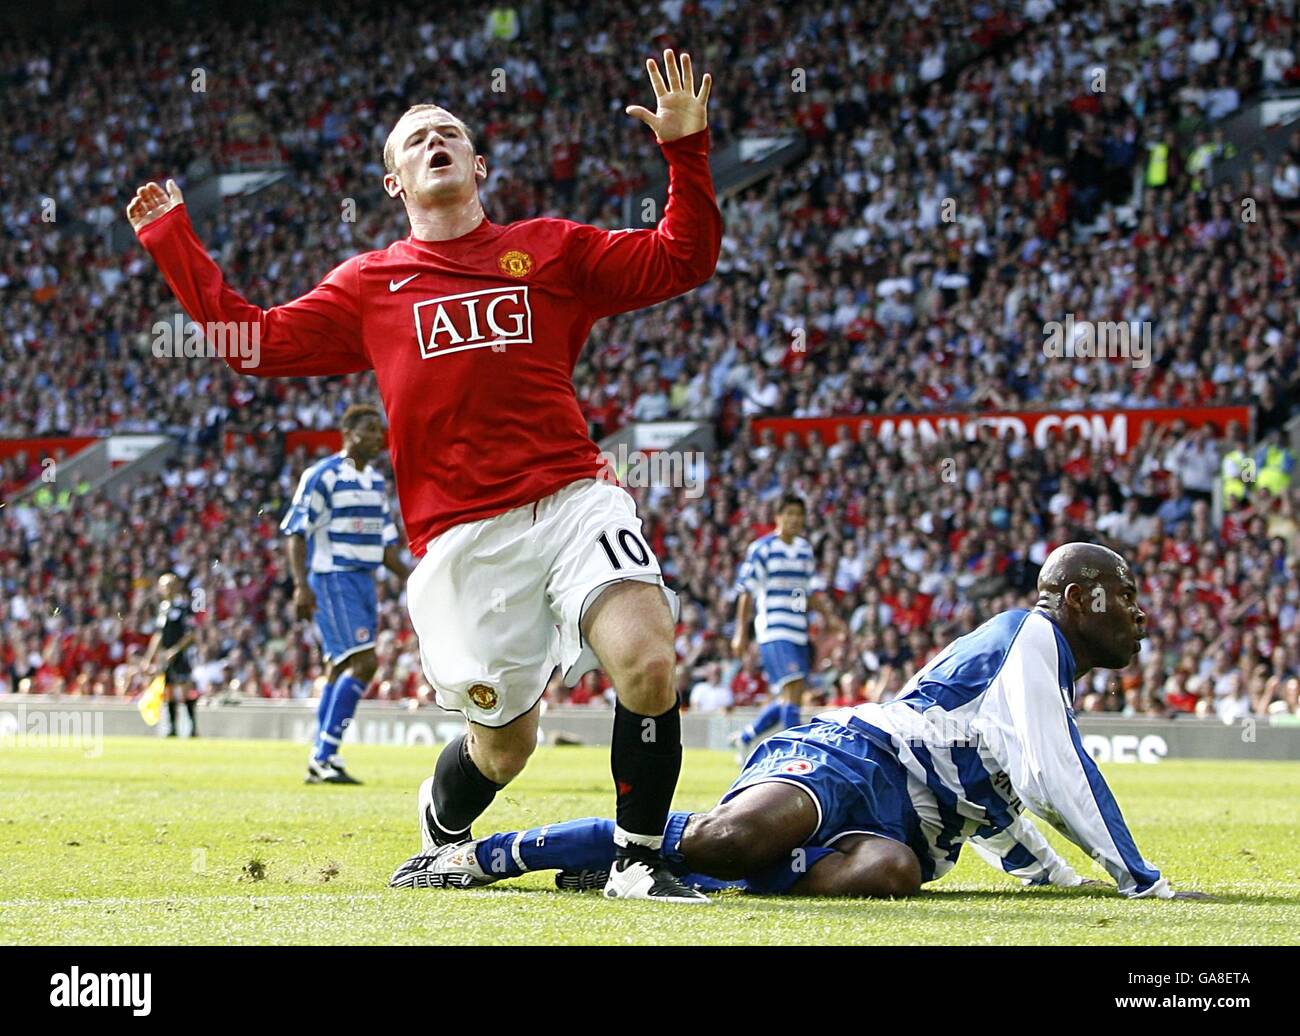 Soccer - Barclays Premier League - Manchester United v Reading - Old Trafford Stock Photo